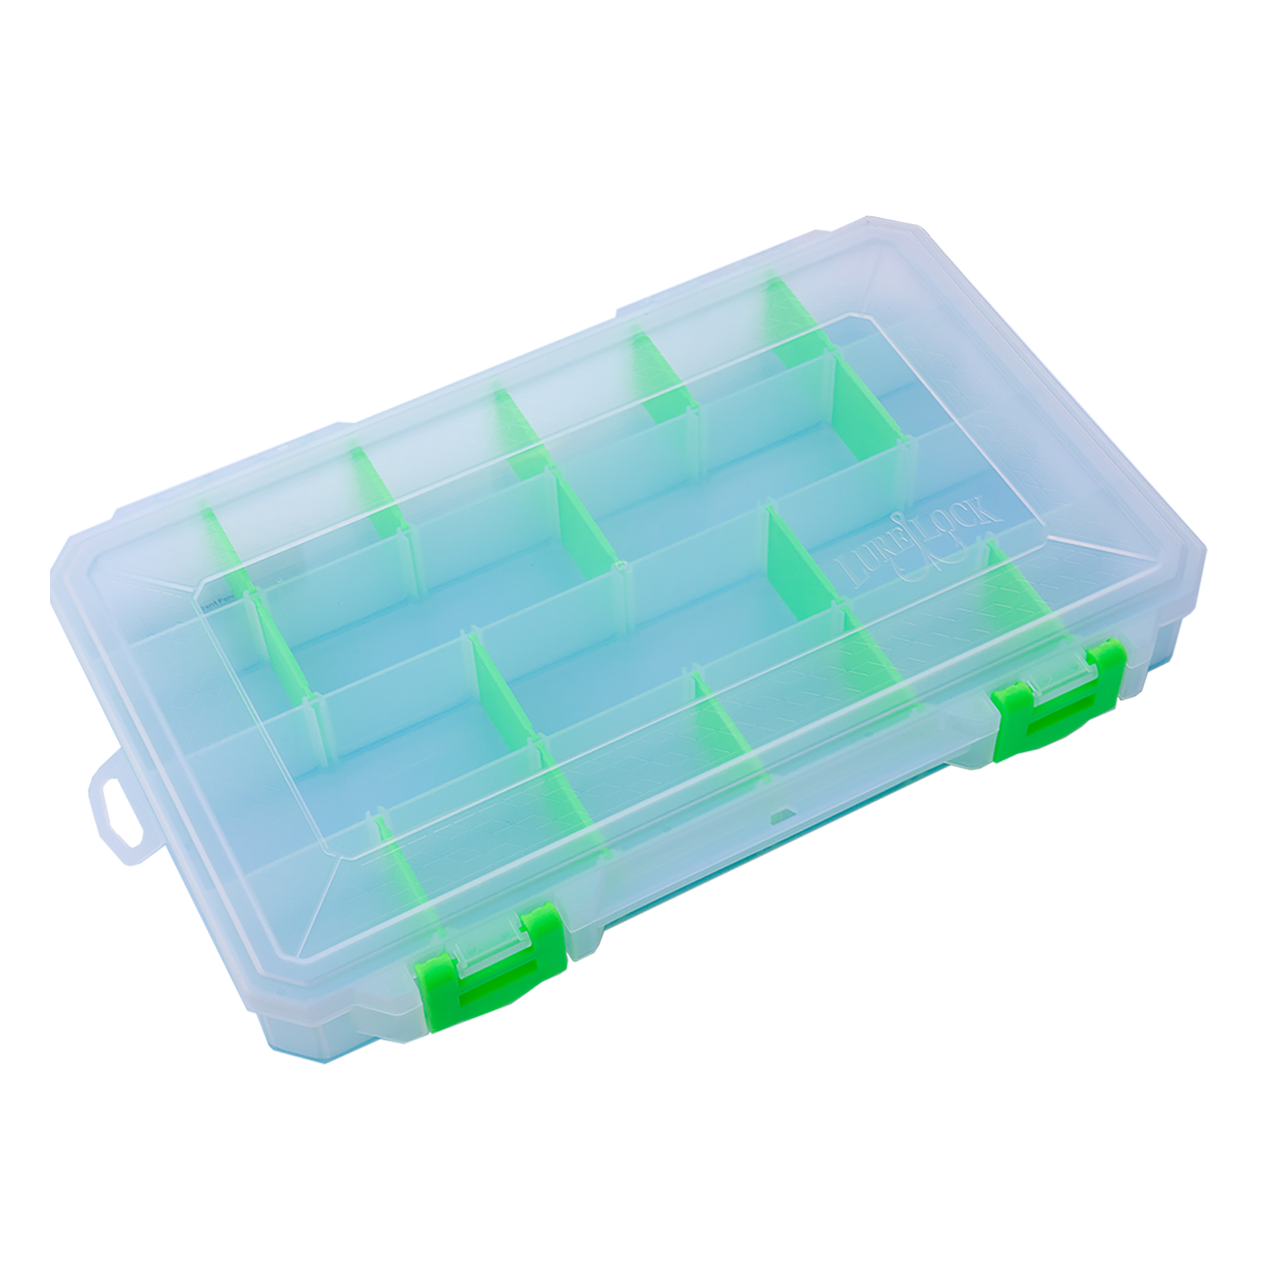 Small Lure Lock Fishing Tackle Box with TakLogic Technology